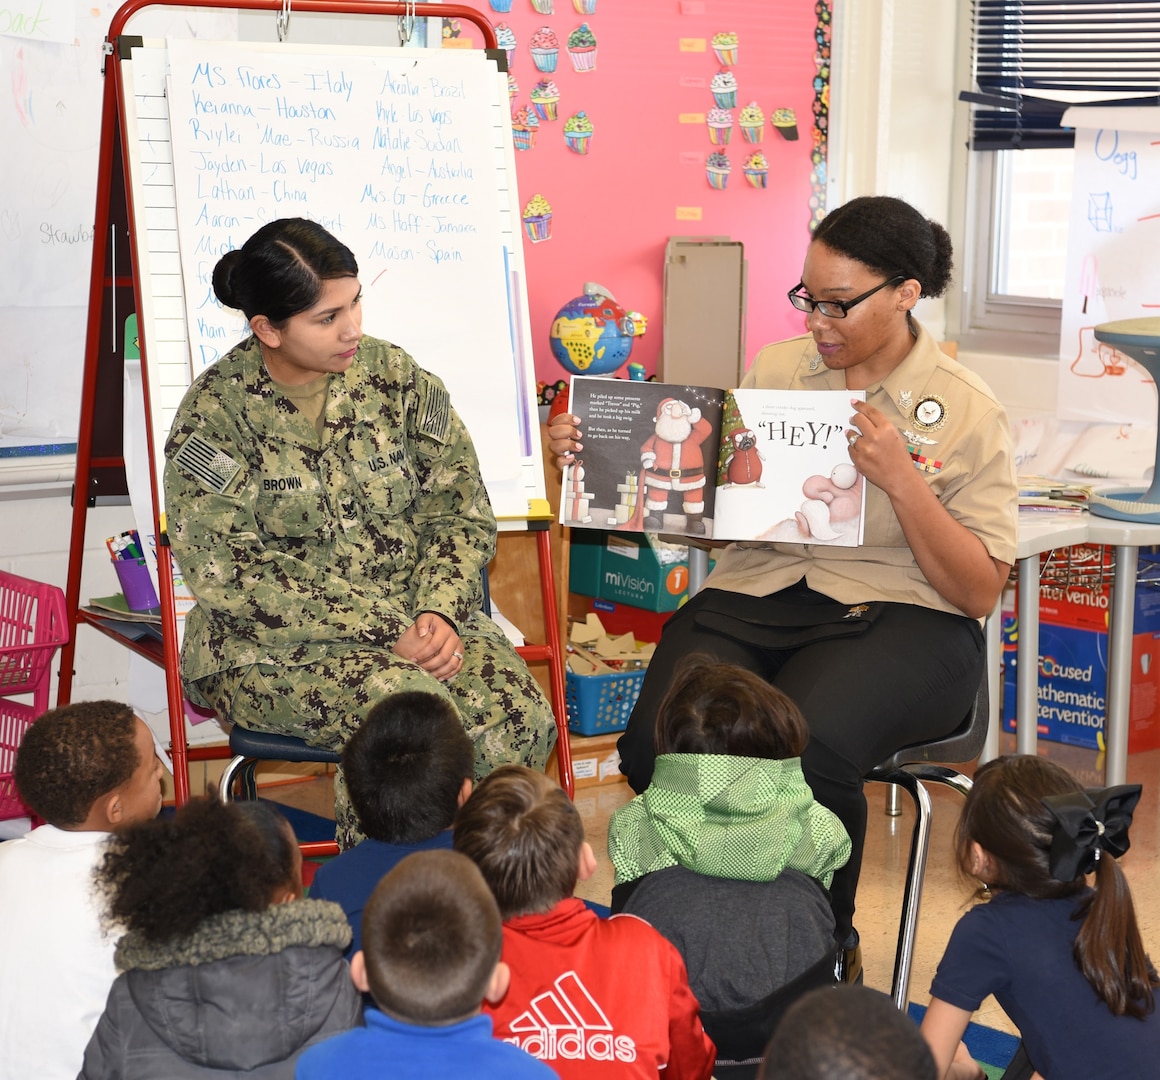 Petty Officer 1st Class Kamitria Delaney (right), assistant command career counselor assigned to Navy Recruiting District San Antonio, joined by Petty Officer 2nd Class Angelica Brown (left), NRD San Antonio’s  community service coordinator, reads to a first-grade class at Dorie Miller Elementary School as part of the school’s annual Pearl Harbor and Dorie Miller Remembrance Program. The event was held in remembrance of those who fought and for those who lost their lives on Dec. 7, 1941.